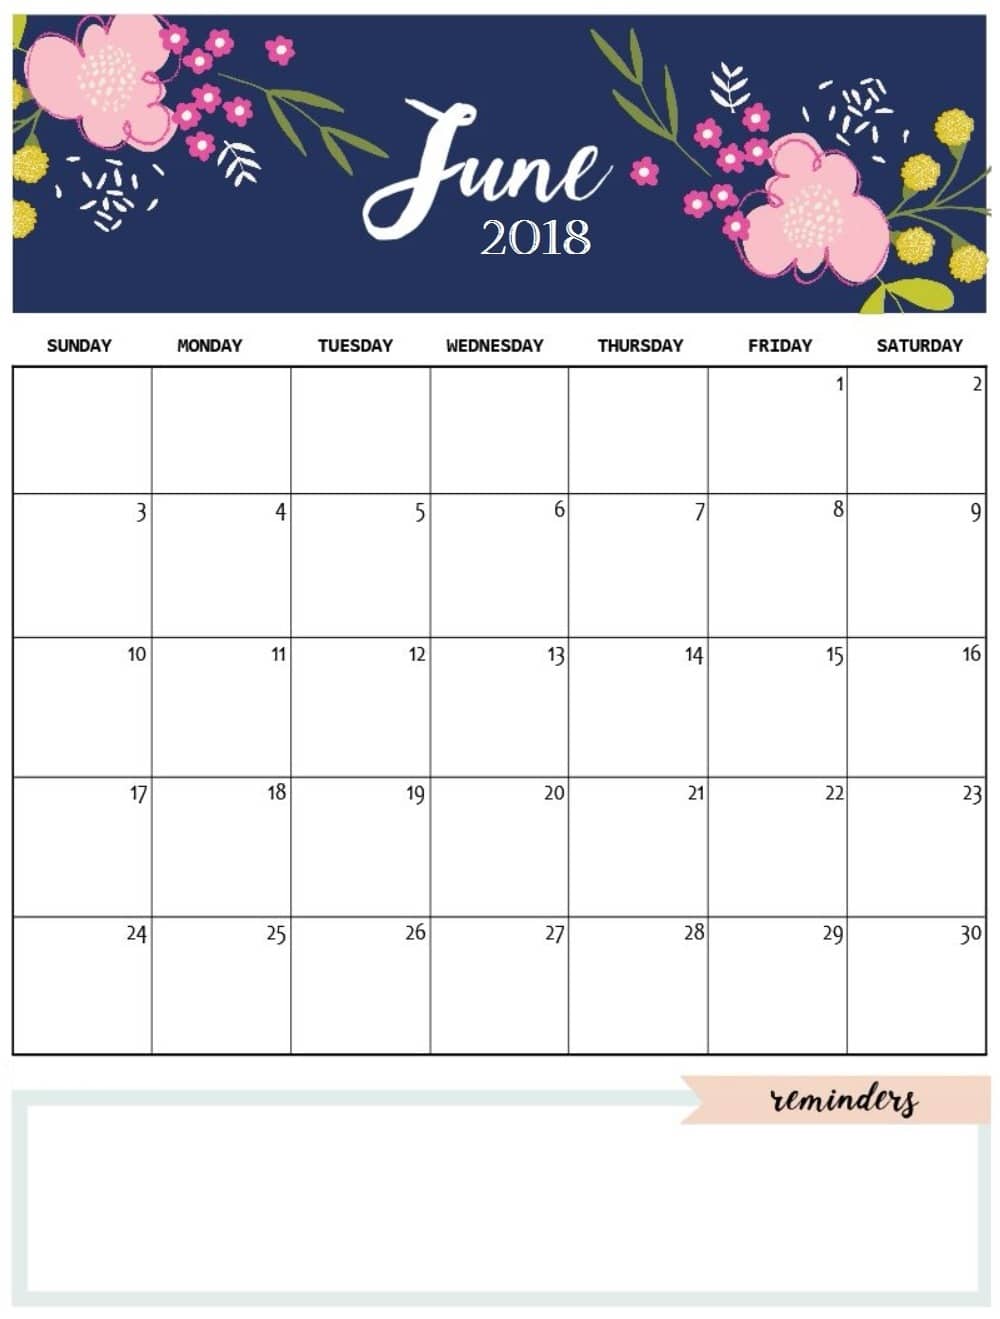 june-2018-calendar-table-quote-images-hd-free